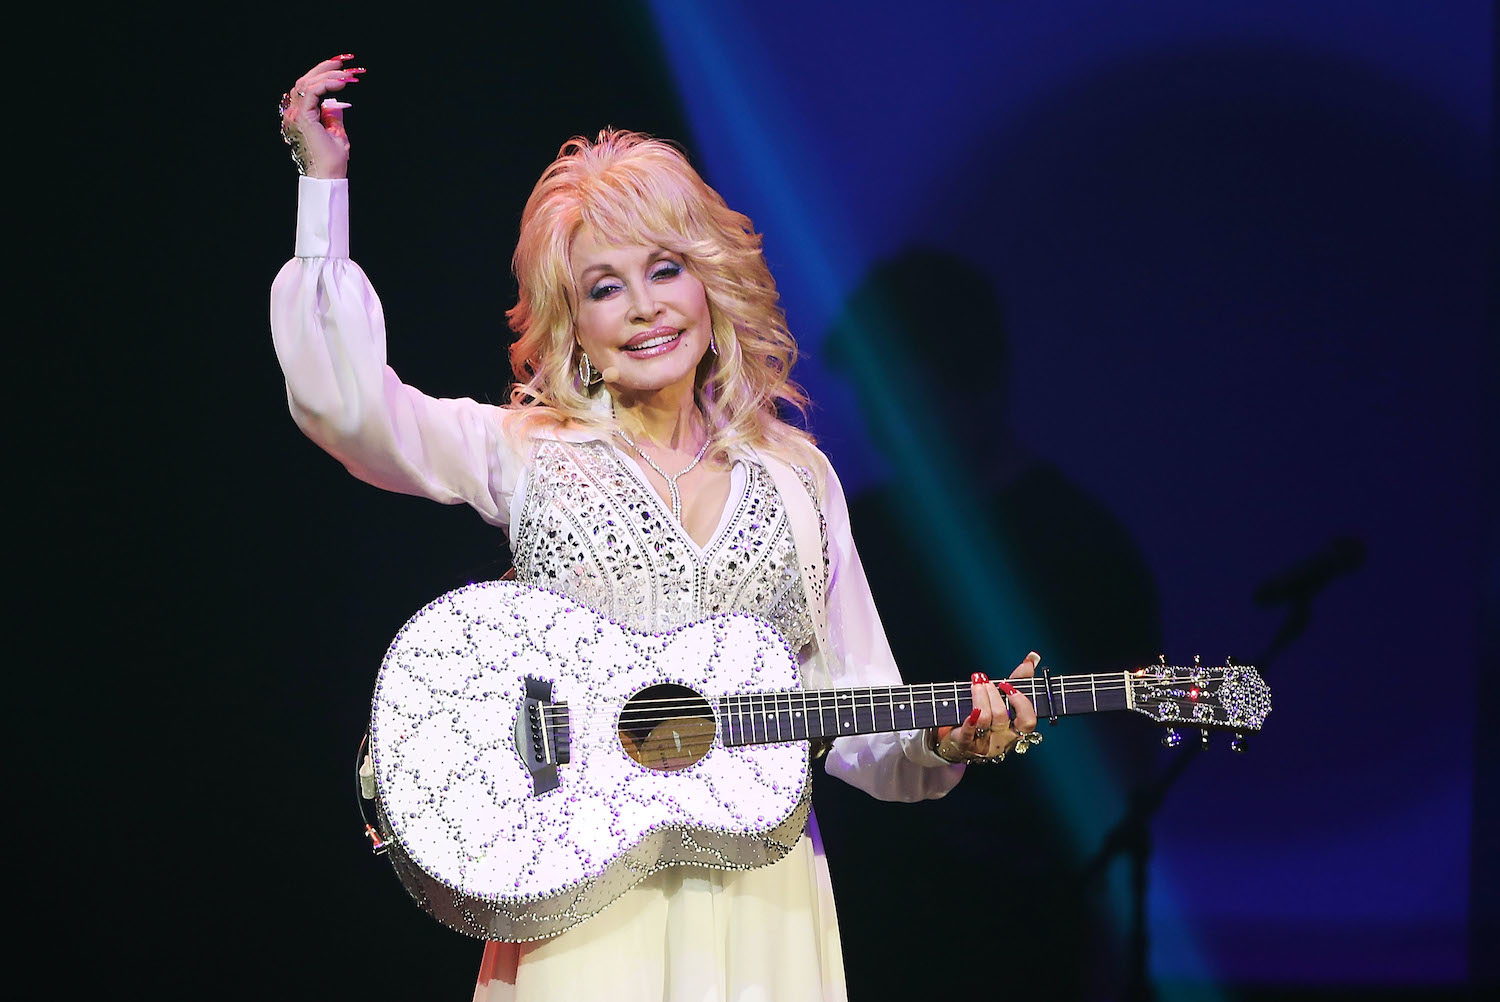 Dolly Parton wears a white dress while holding a white jeweled guitar and smiling with one hand in the air during a performance in Sydney, Australia